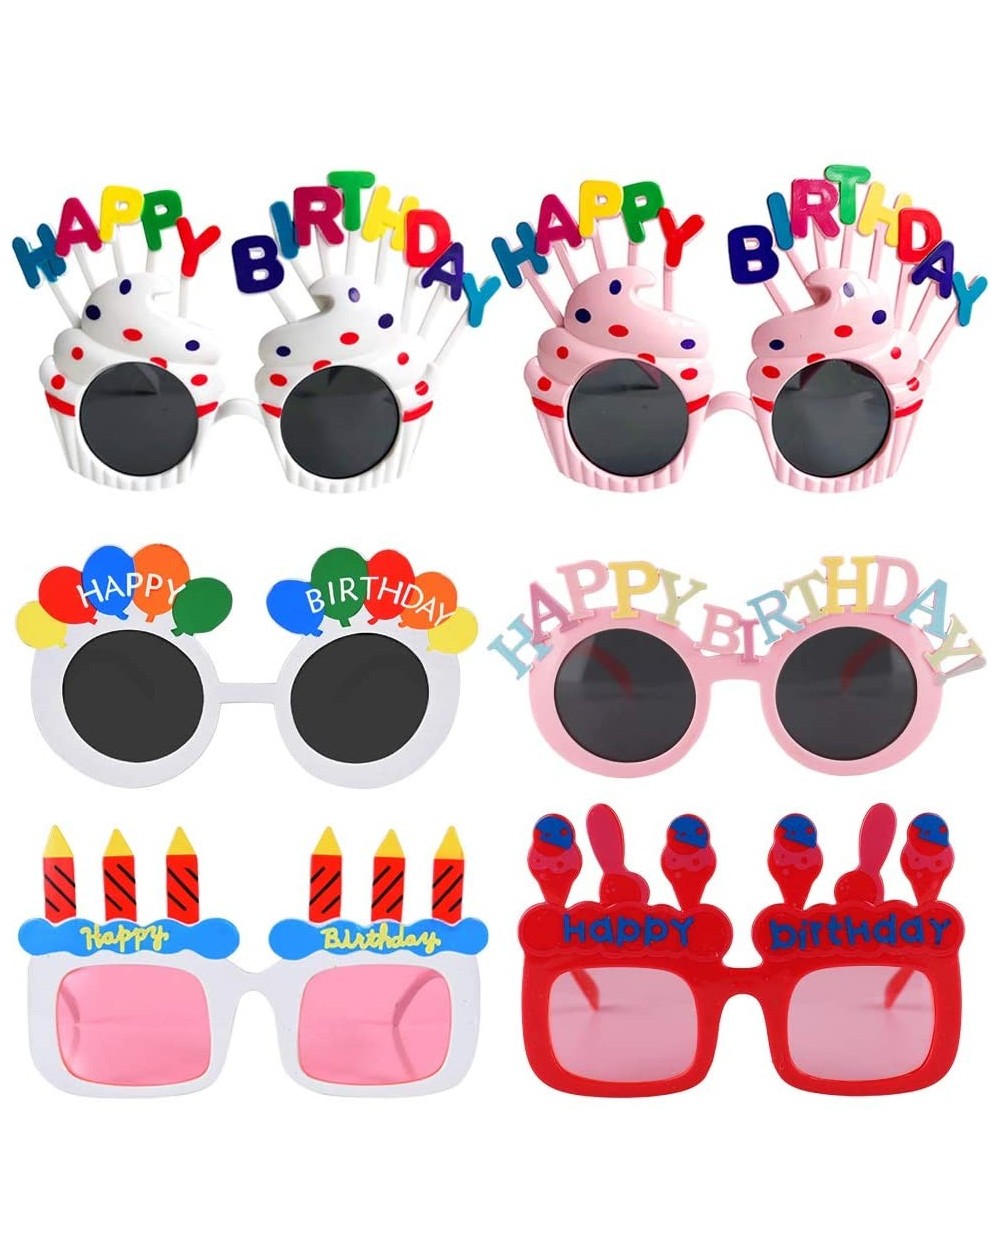 Adult Novelty Novelty Birthday Glasses - Birthday Photo Props Funny Sunglasses - Birthday Party Favors for Kids & Adults 6 Pa...